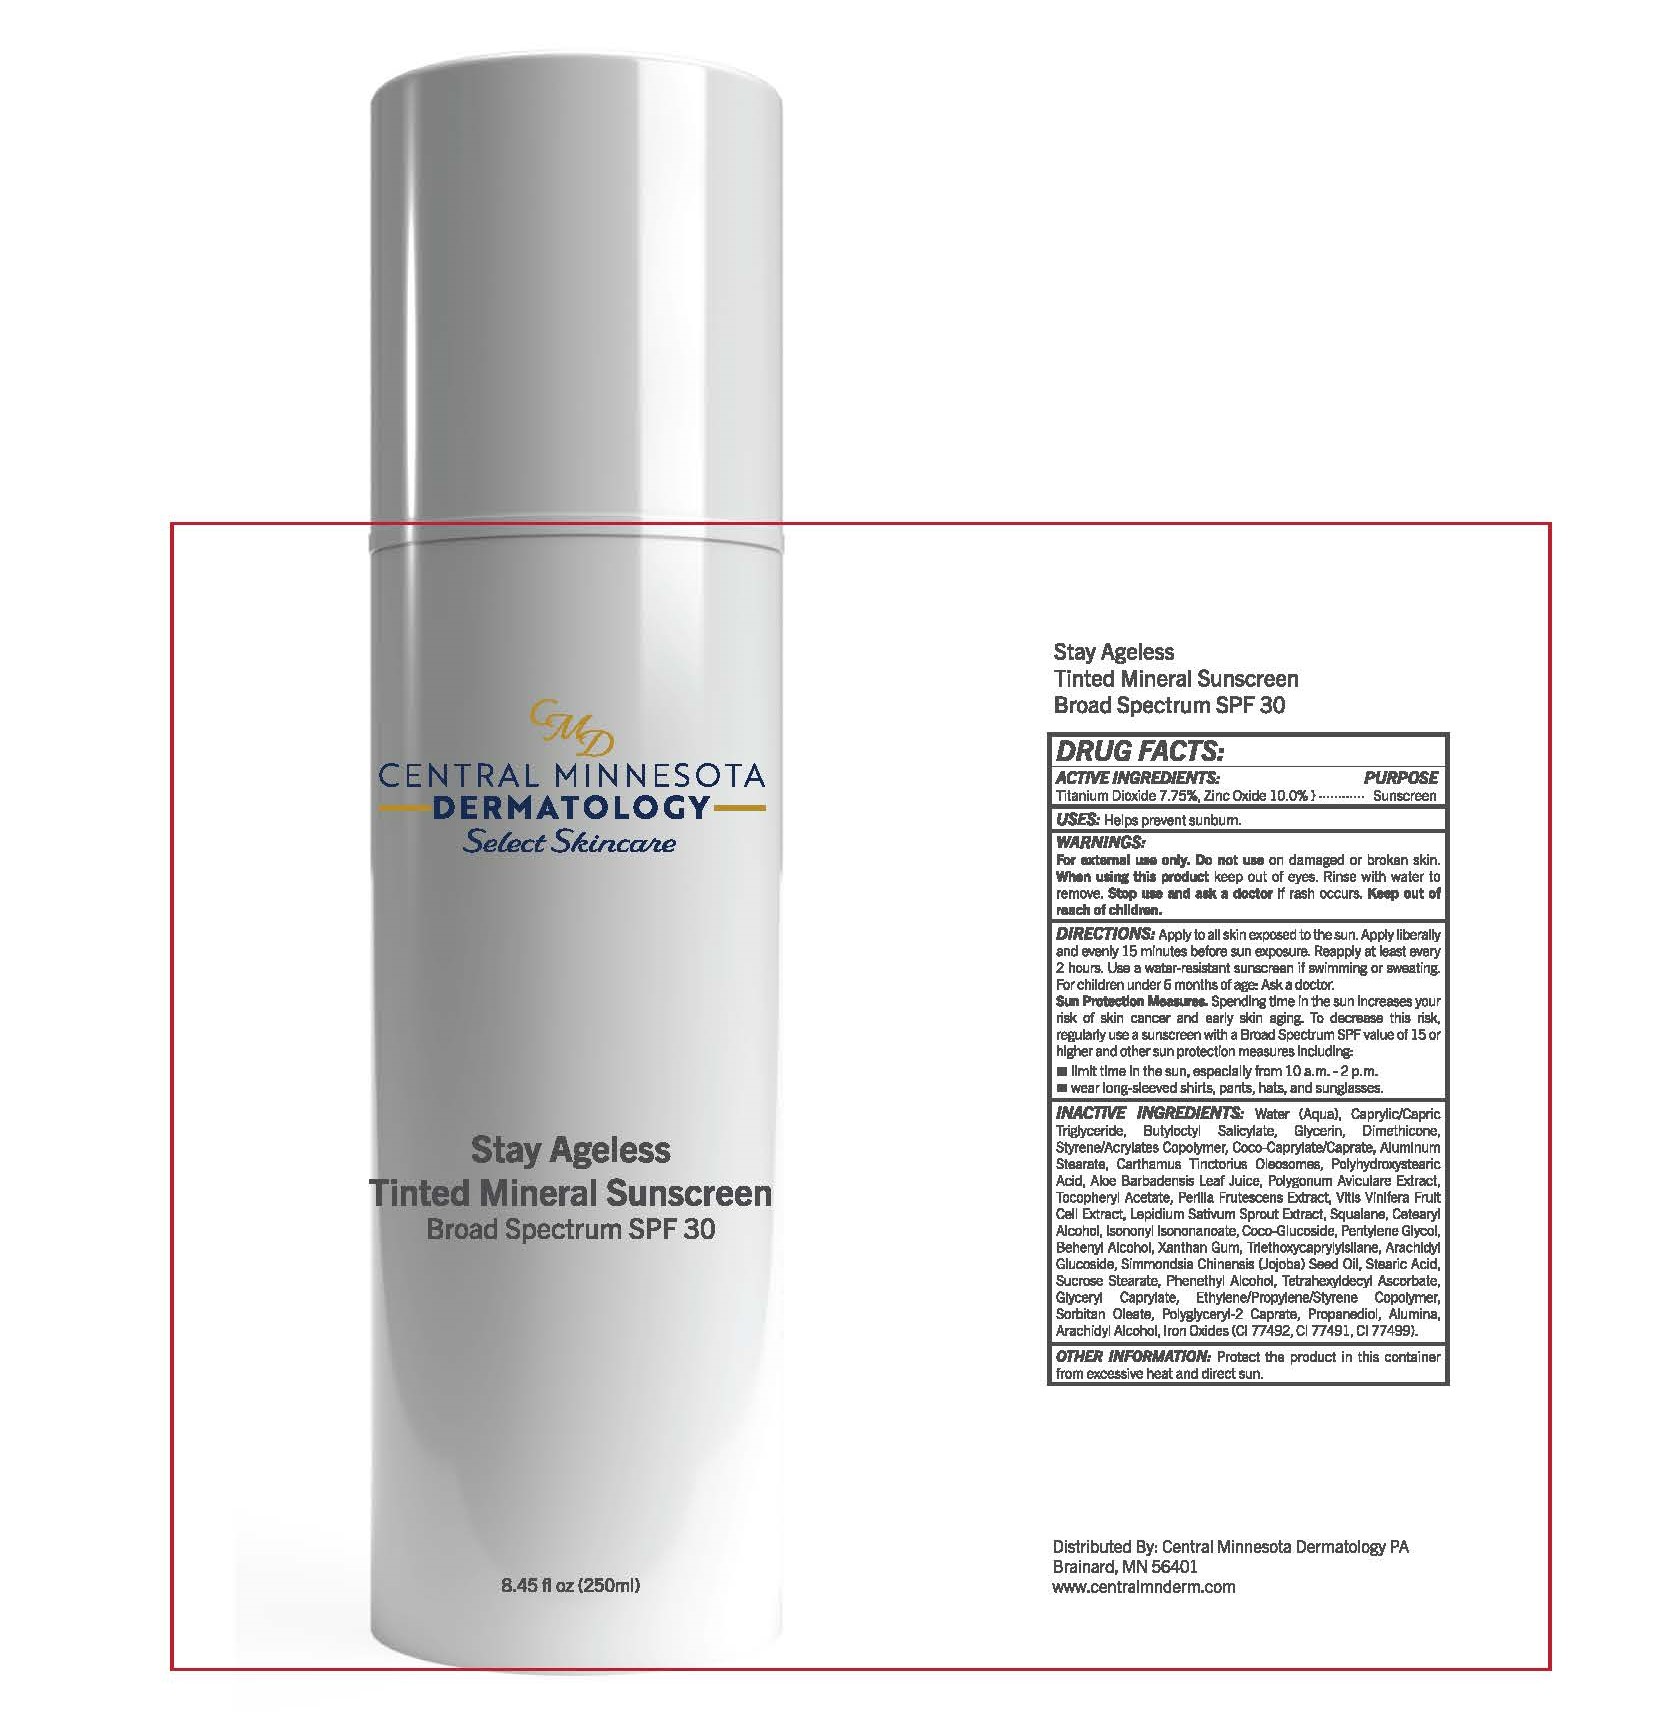 Stay Ageless Tinted Mineral Sunscreen Broad Spectrum SPF30